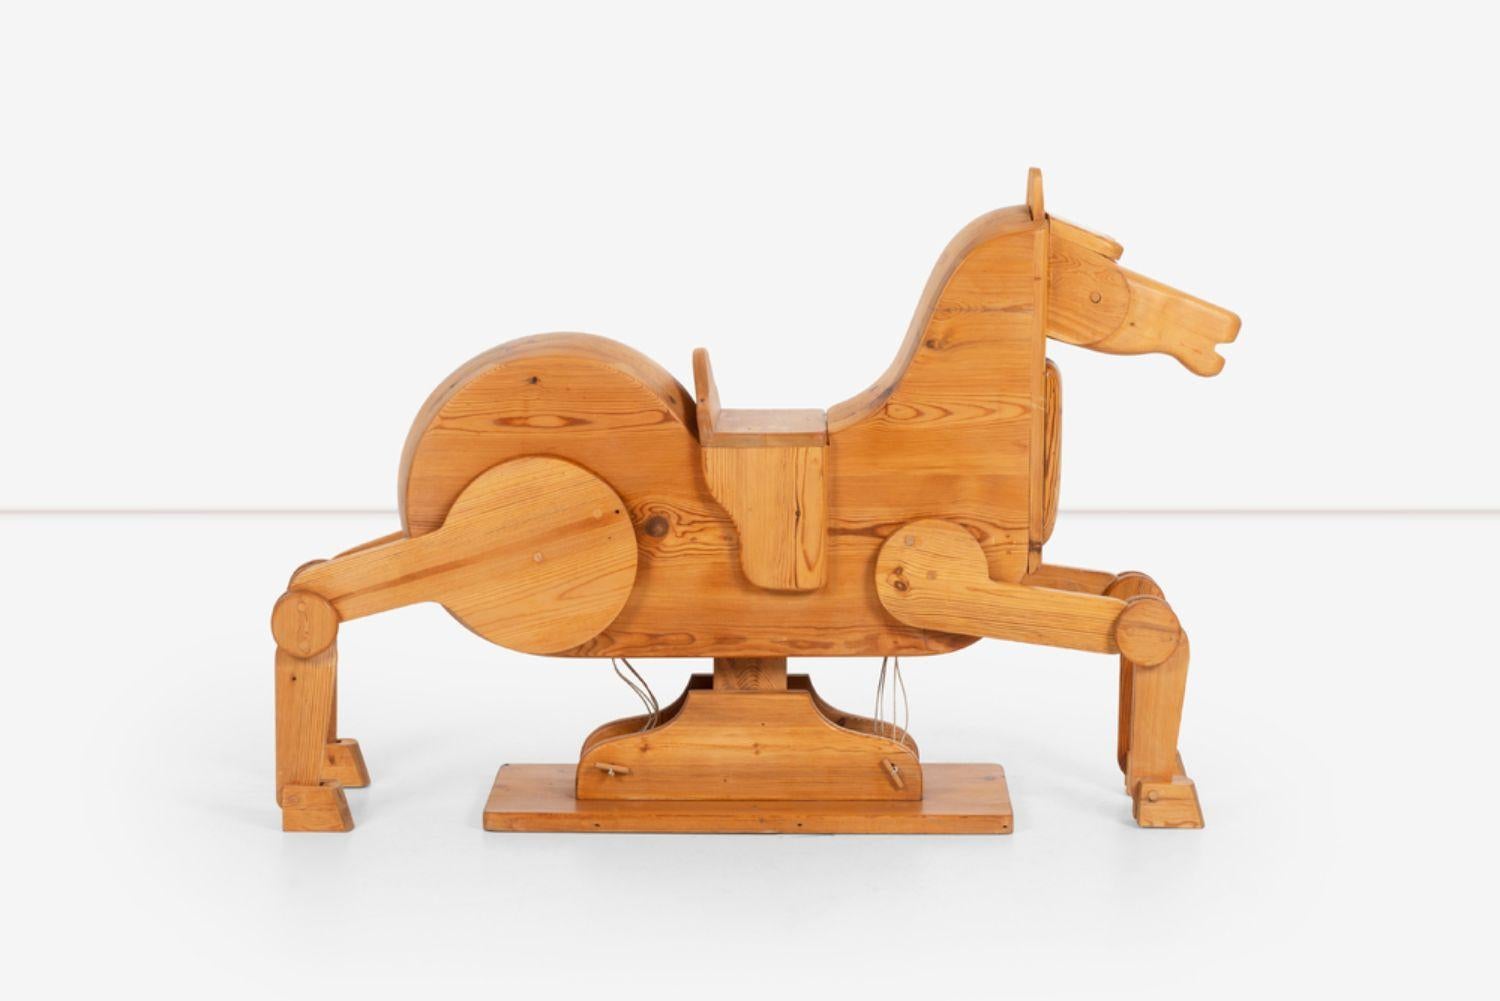 Danish Rocking Horse from Den Permanente, Copenhagen. 1960c. Interactive by pulling strings for different positions.
Den Permanente was a store in Copenhagen that existed from the 1930s to the 1980s. It was more than a store, it was a collective of